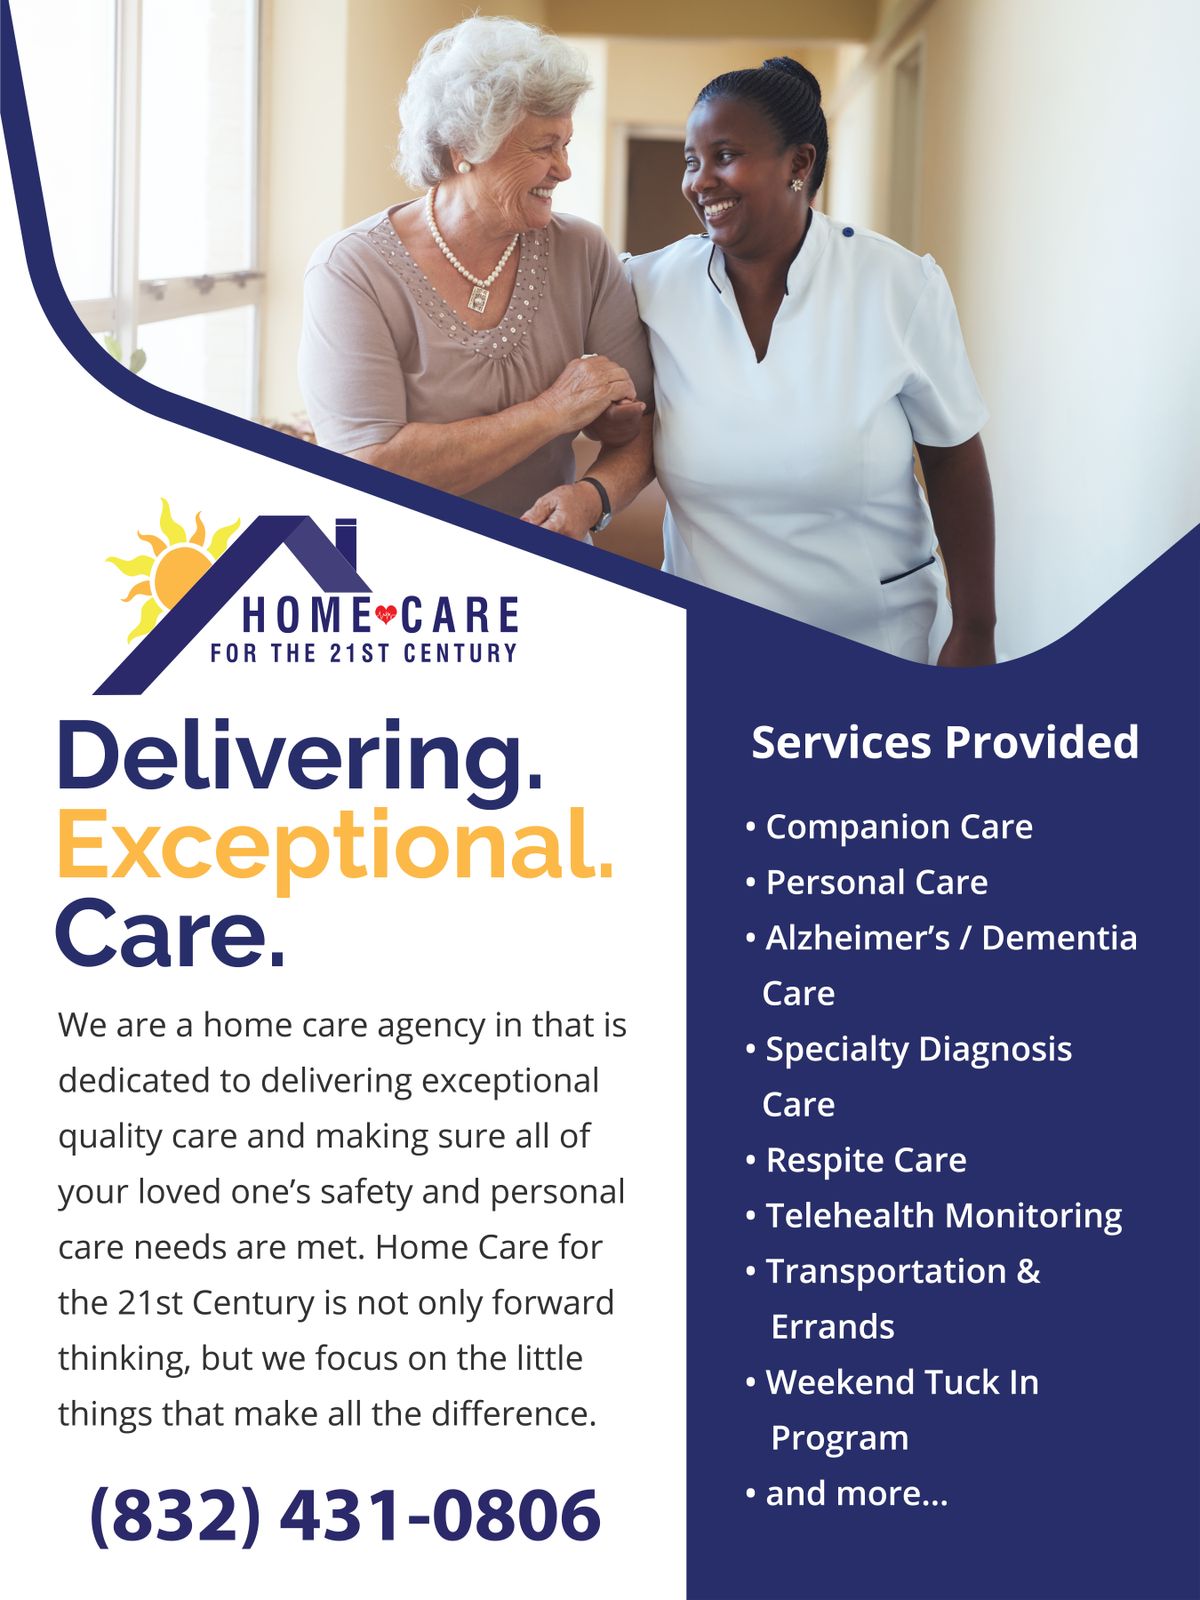 Home Care for the 21st Century - West Houston 3